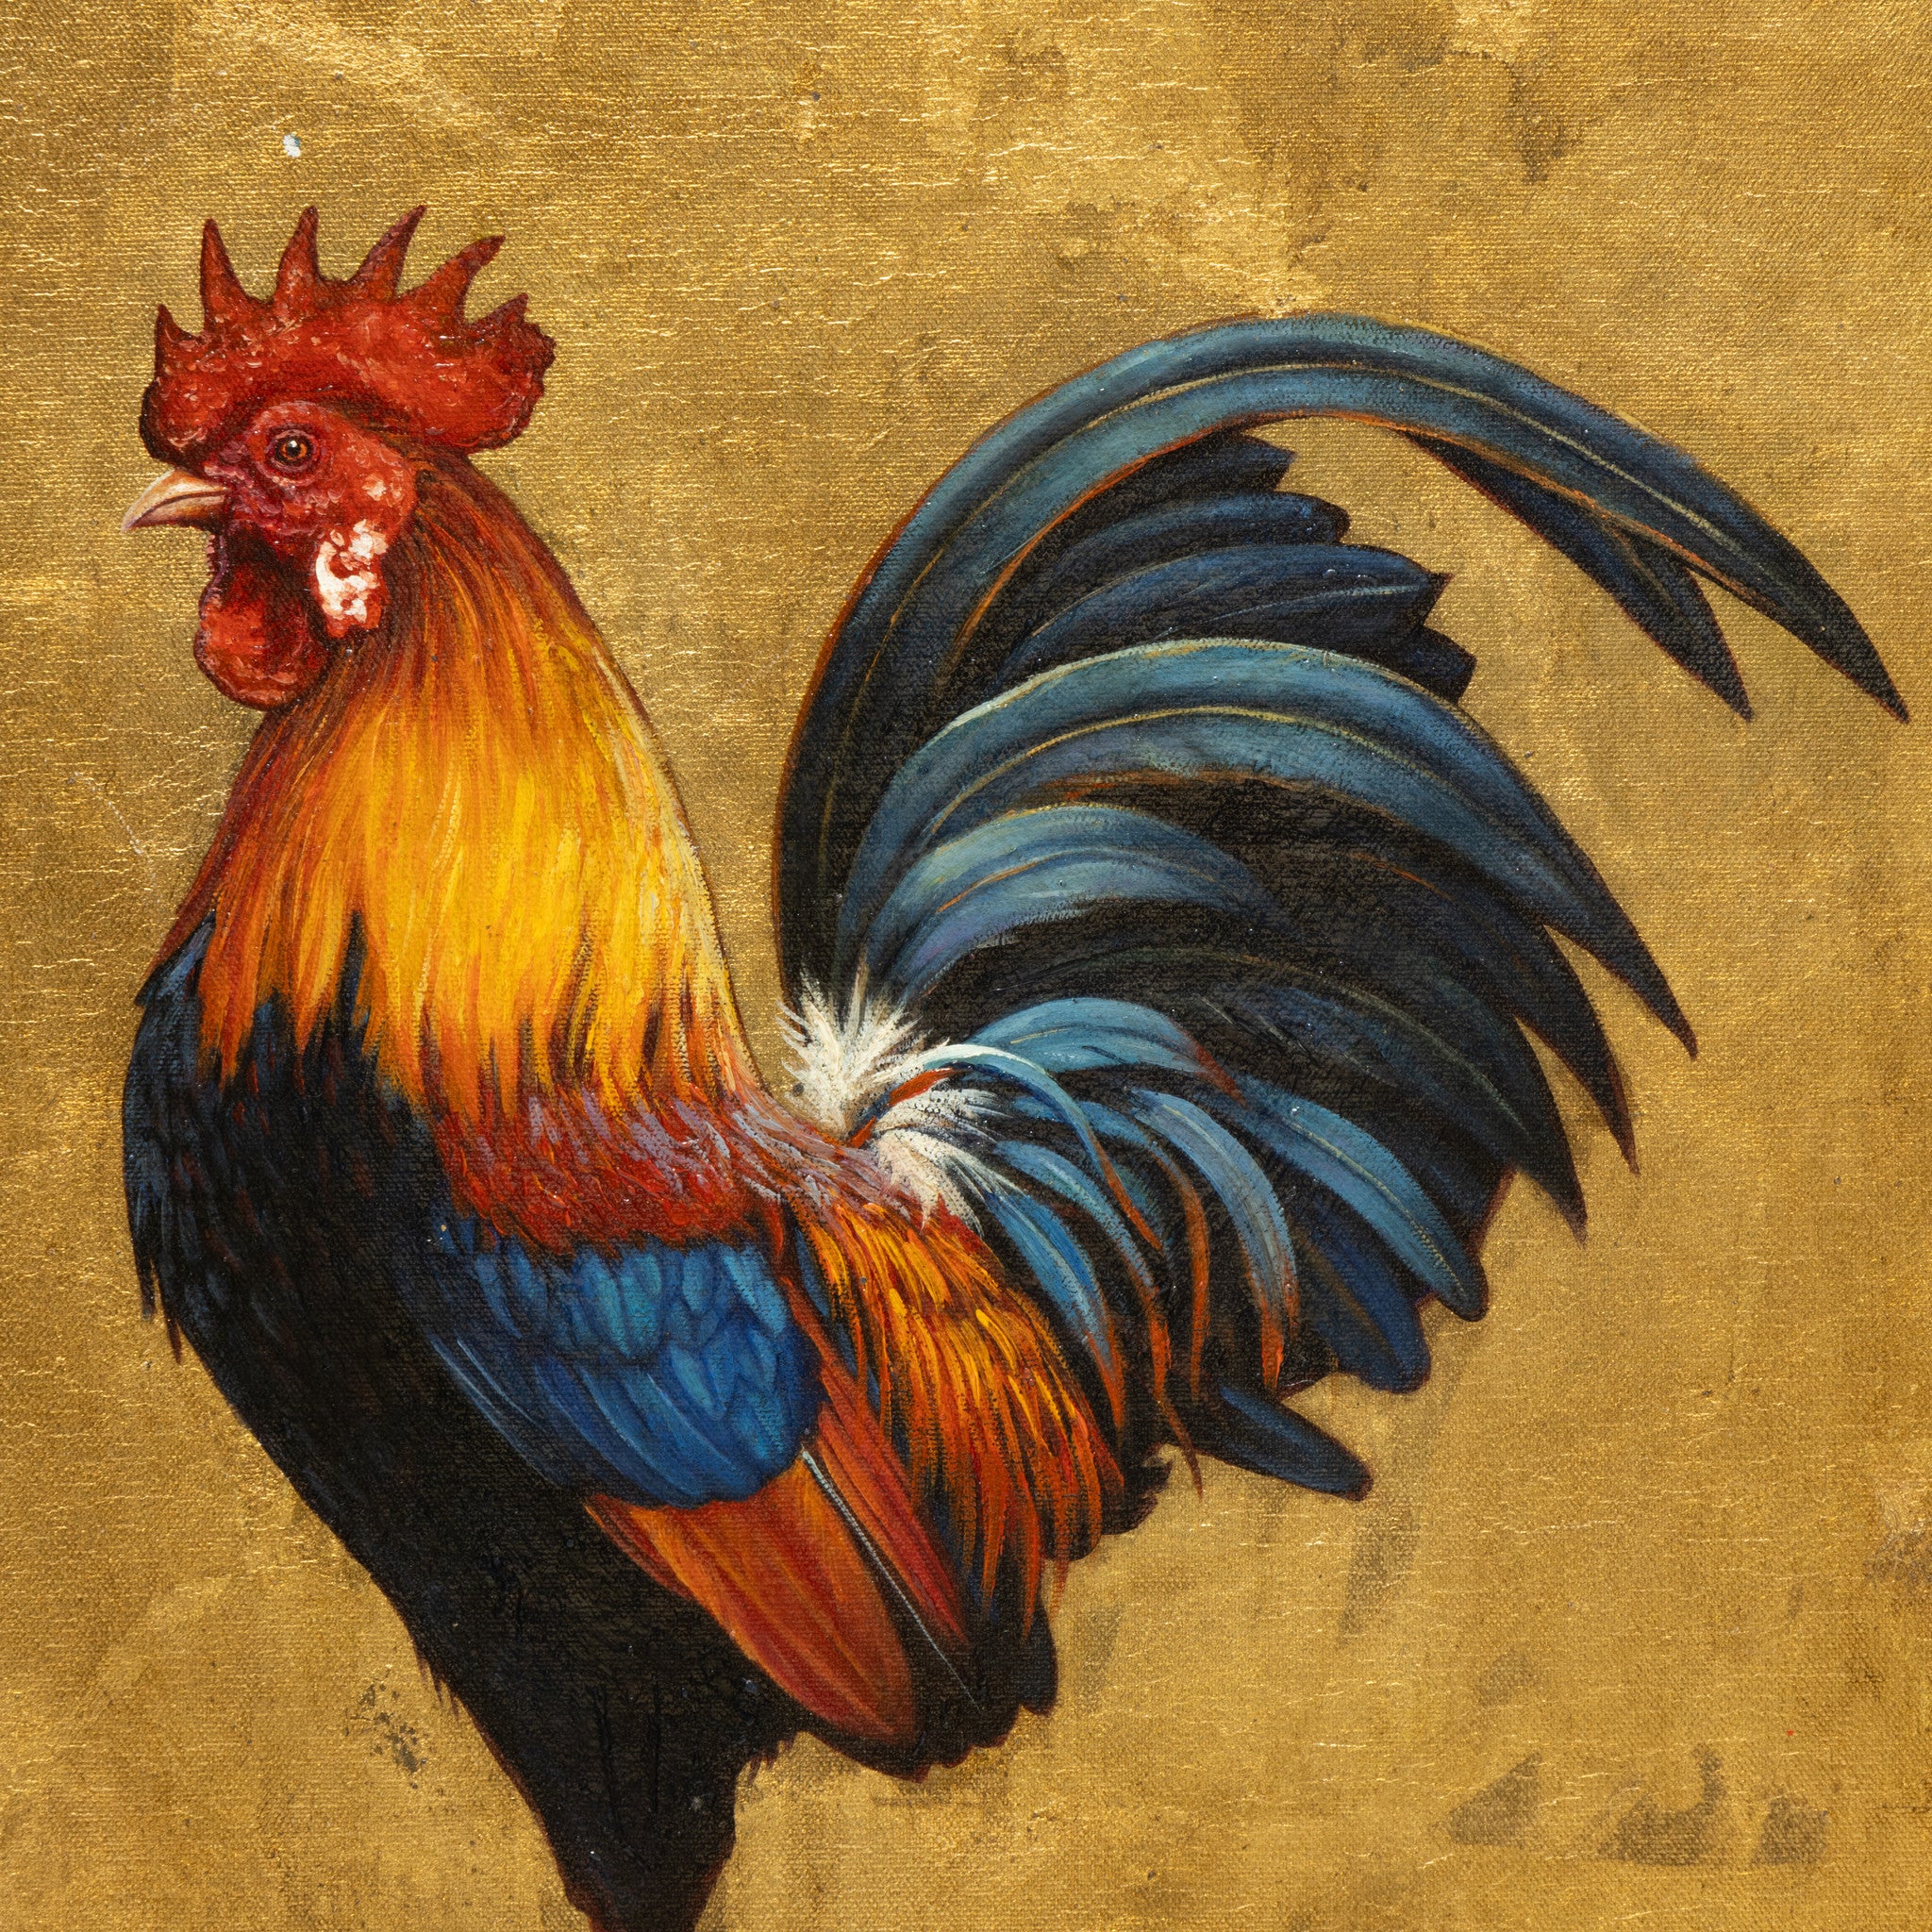 Rooster by E. Tapia